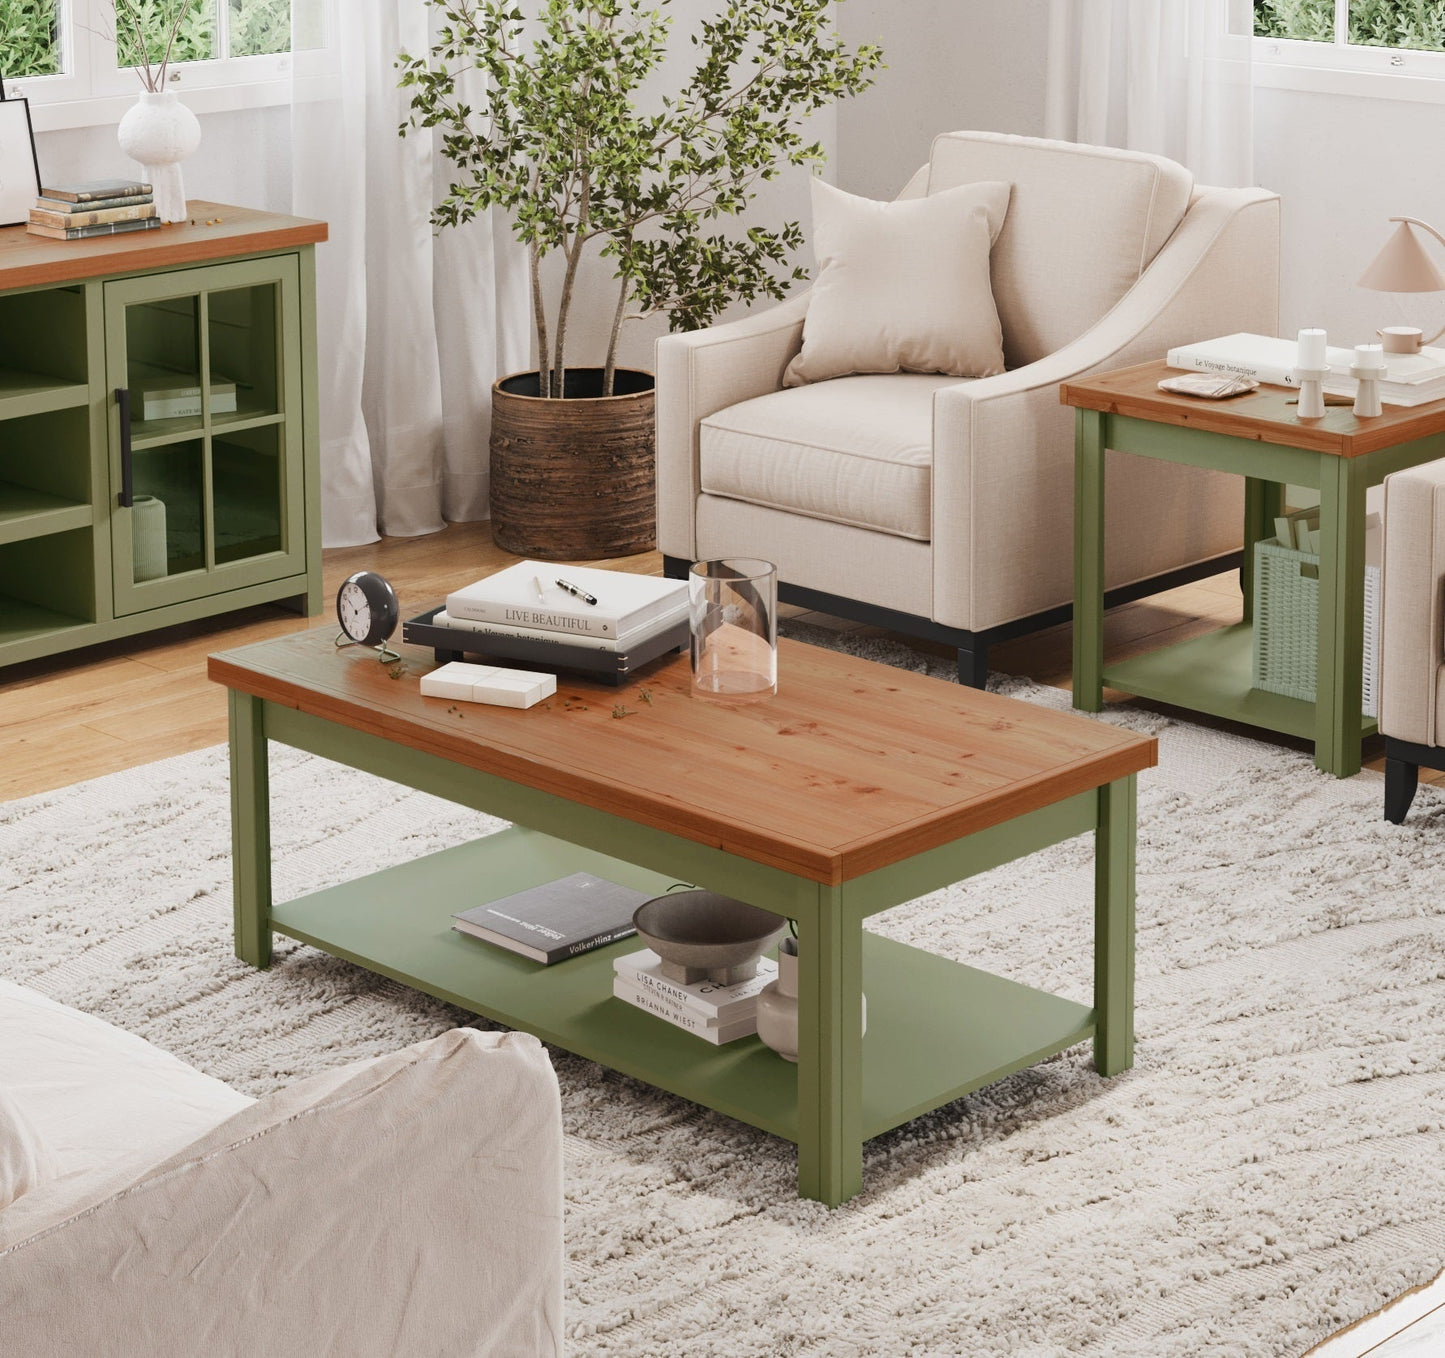 Bridgevine Home Vineyard 48 inch Coffee Table, No Assembly Required, Sage Green and Fruitwood Finish